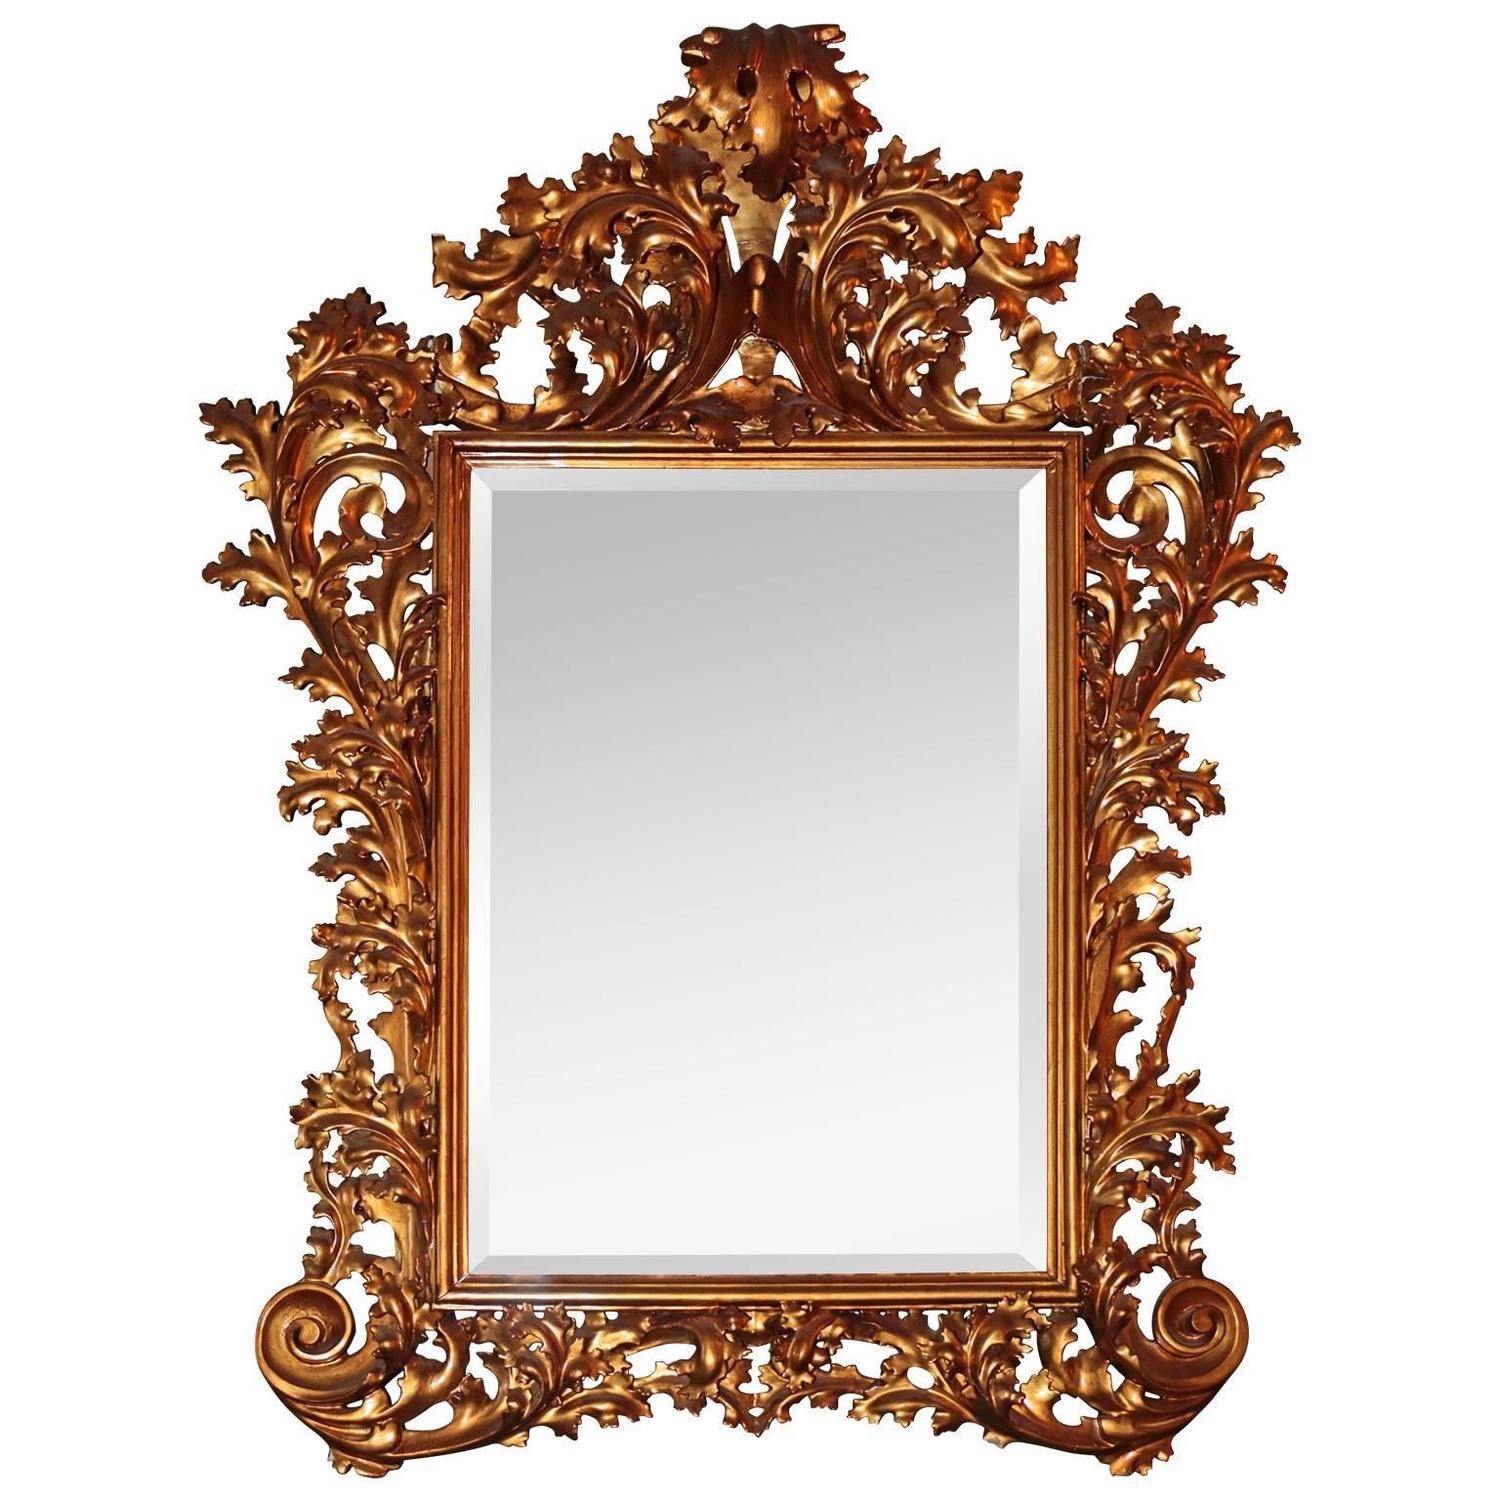 19th Century, French Gilded Rococo Wall Mirror For Sale at 1stdibs